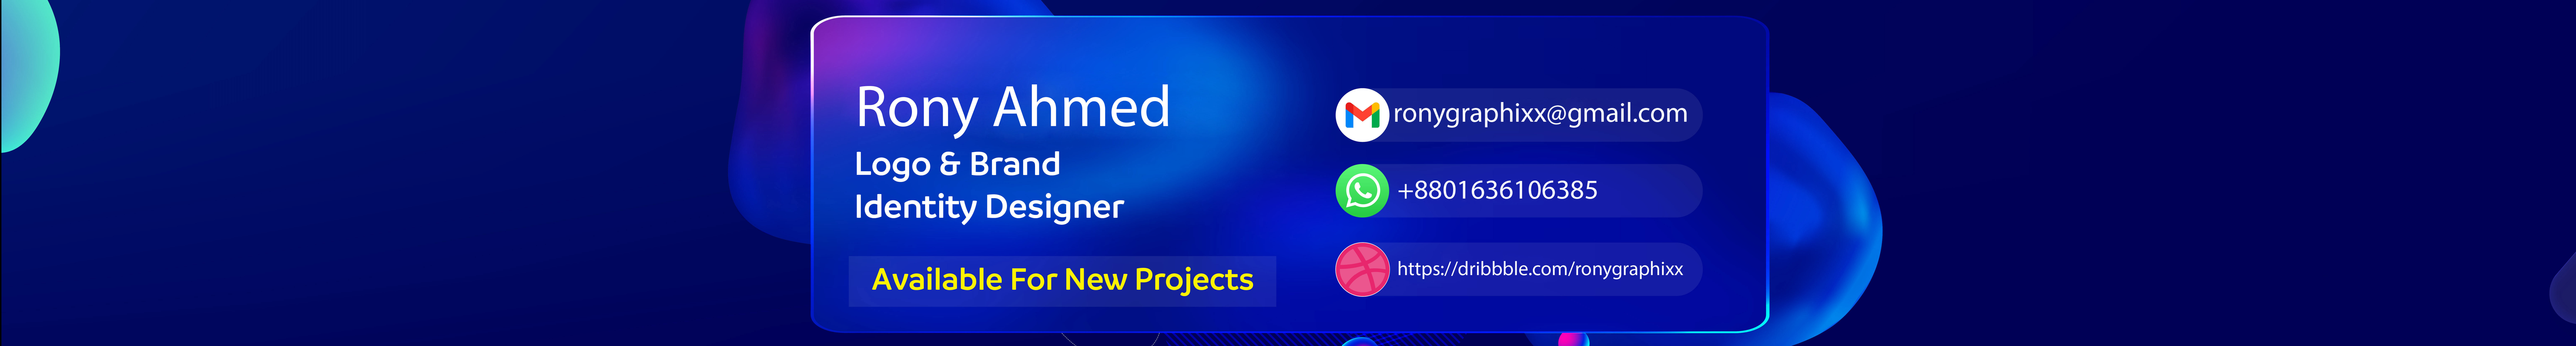 Rony Ahmed's profile banner